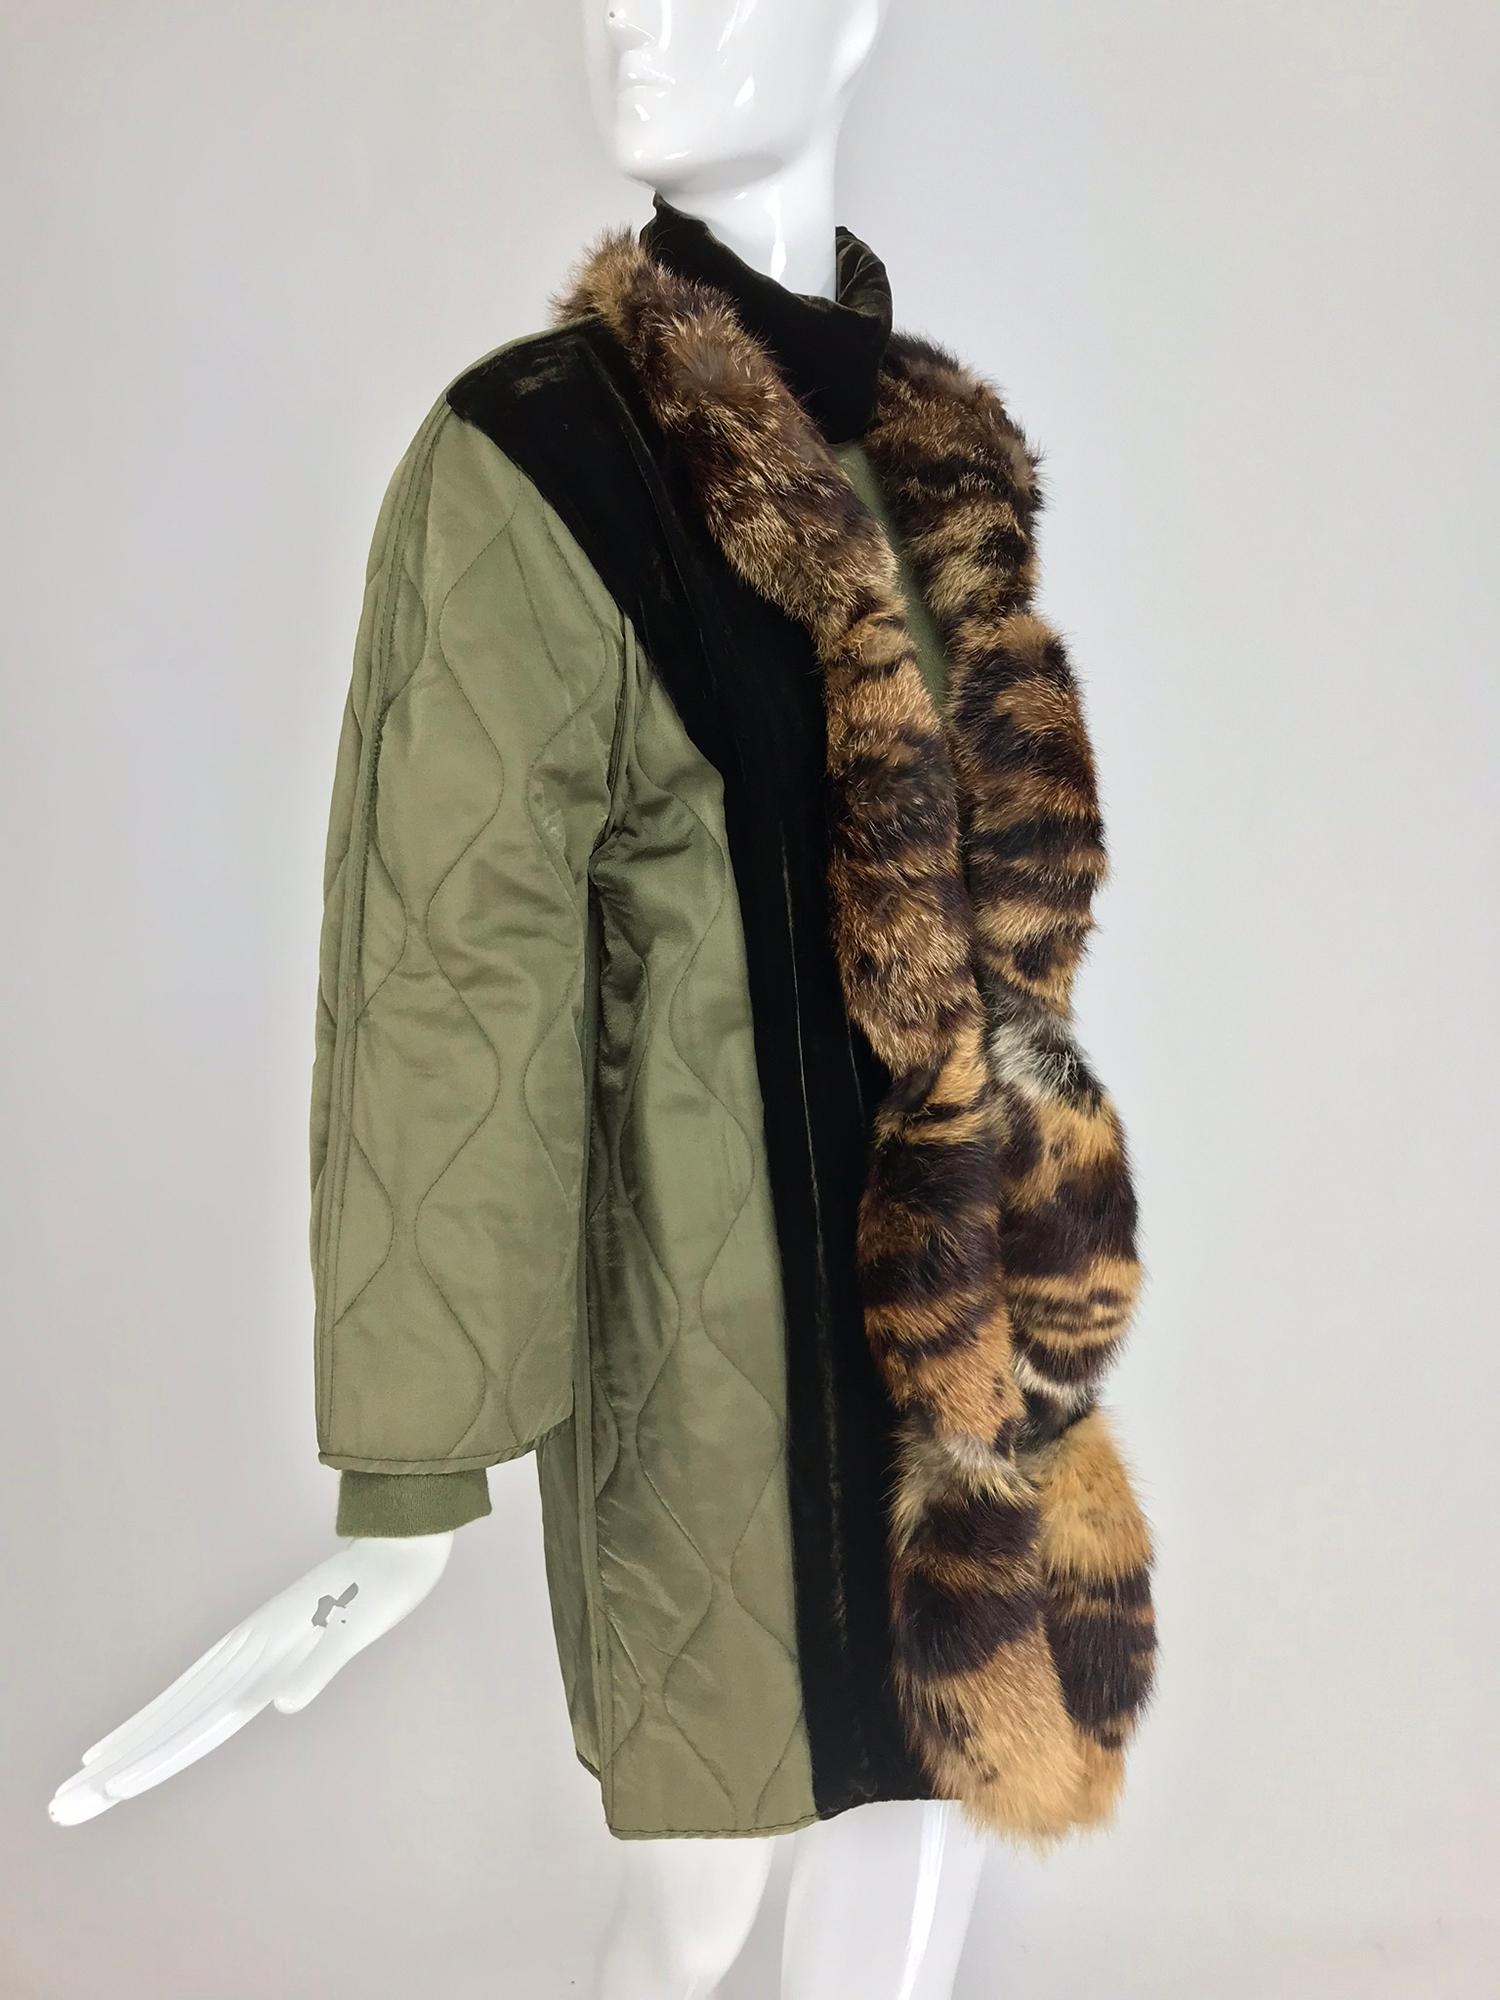 Gianfranco Ferre' velvet and Fur Trimmed quilted jacket with matching sweater from the 1990s.  Olive green quilted jacket with front side panels of a rich darker shade of velvet, the front facings of the jacket are trimmed with fur. This jacket is